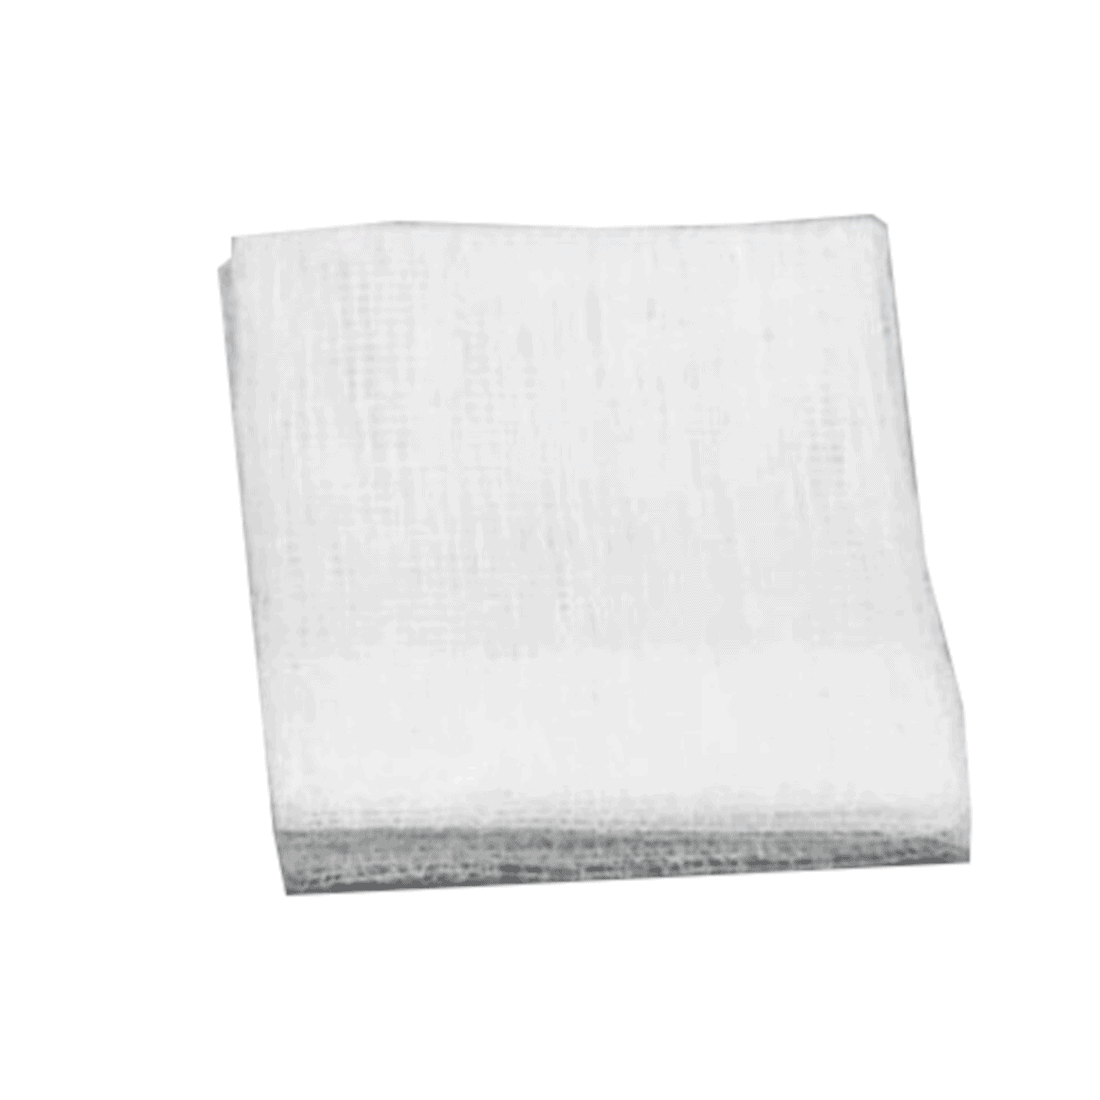 Gauze pads, sterile, individually wrapped, 10.2 cm x 10.2 cm (4 in. x 4 in.)